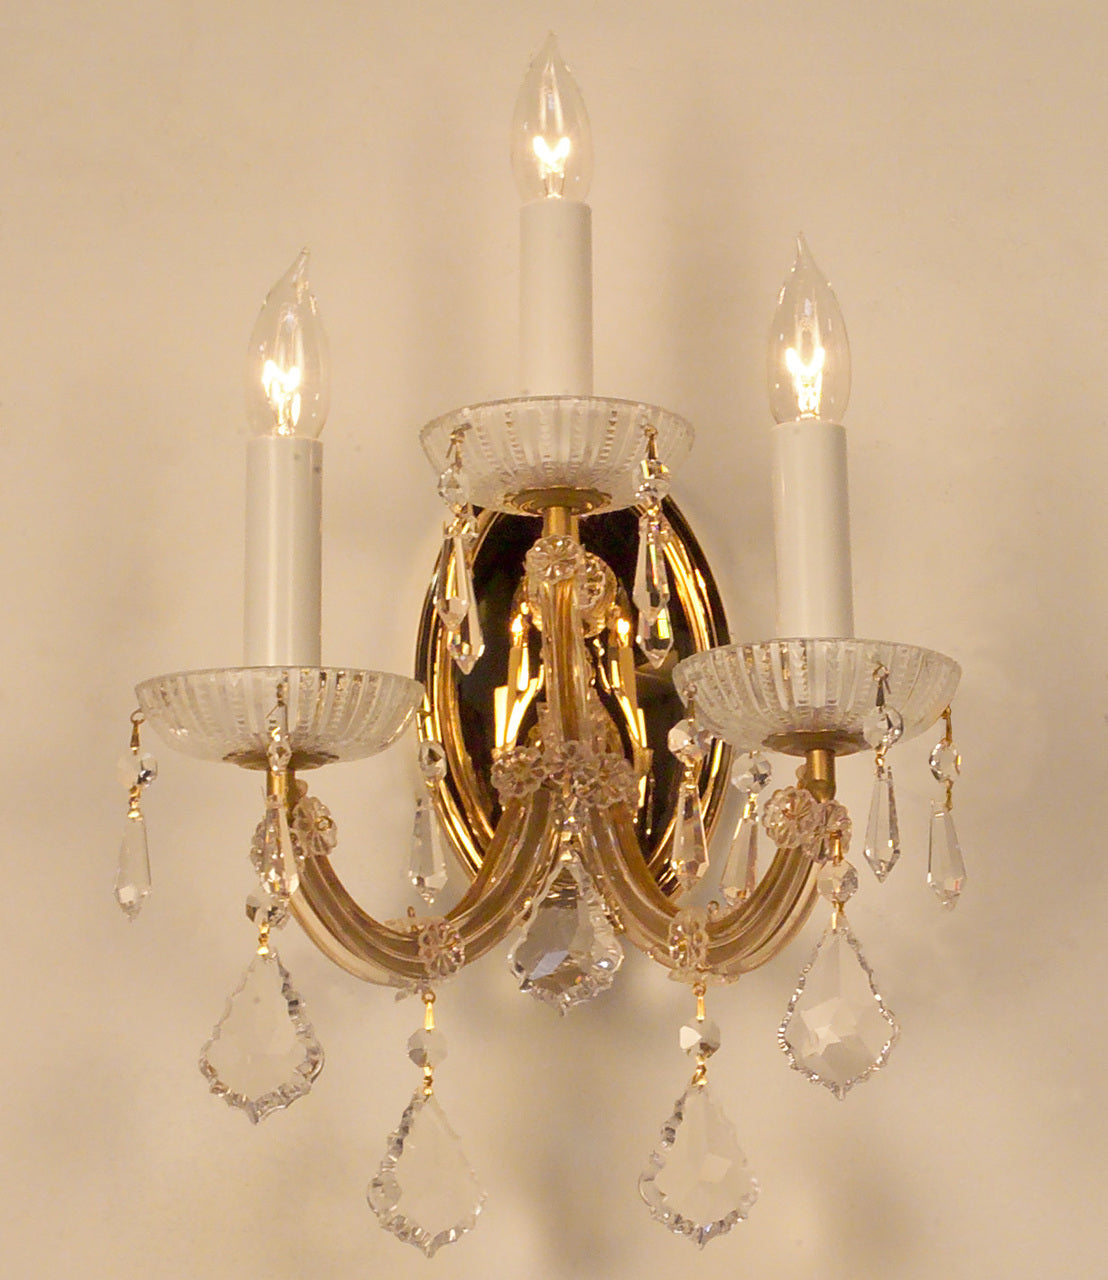 Classic Lighting 8103 OWG SC Maria Theresa Traditional Crystal Wall Sconce in Olde World Gold (Imported from Italy)